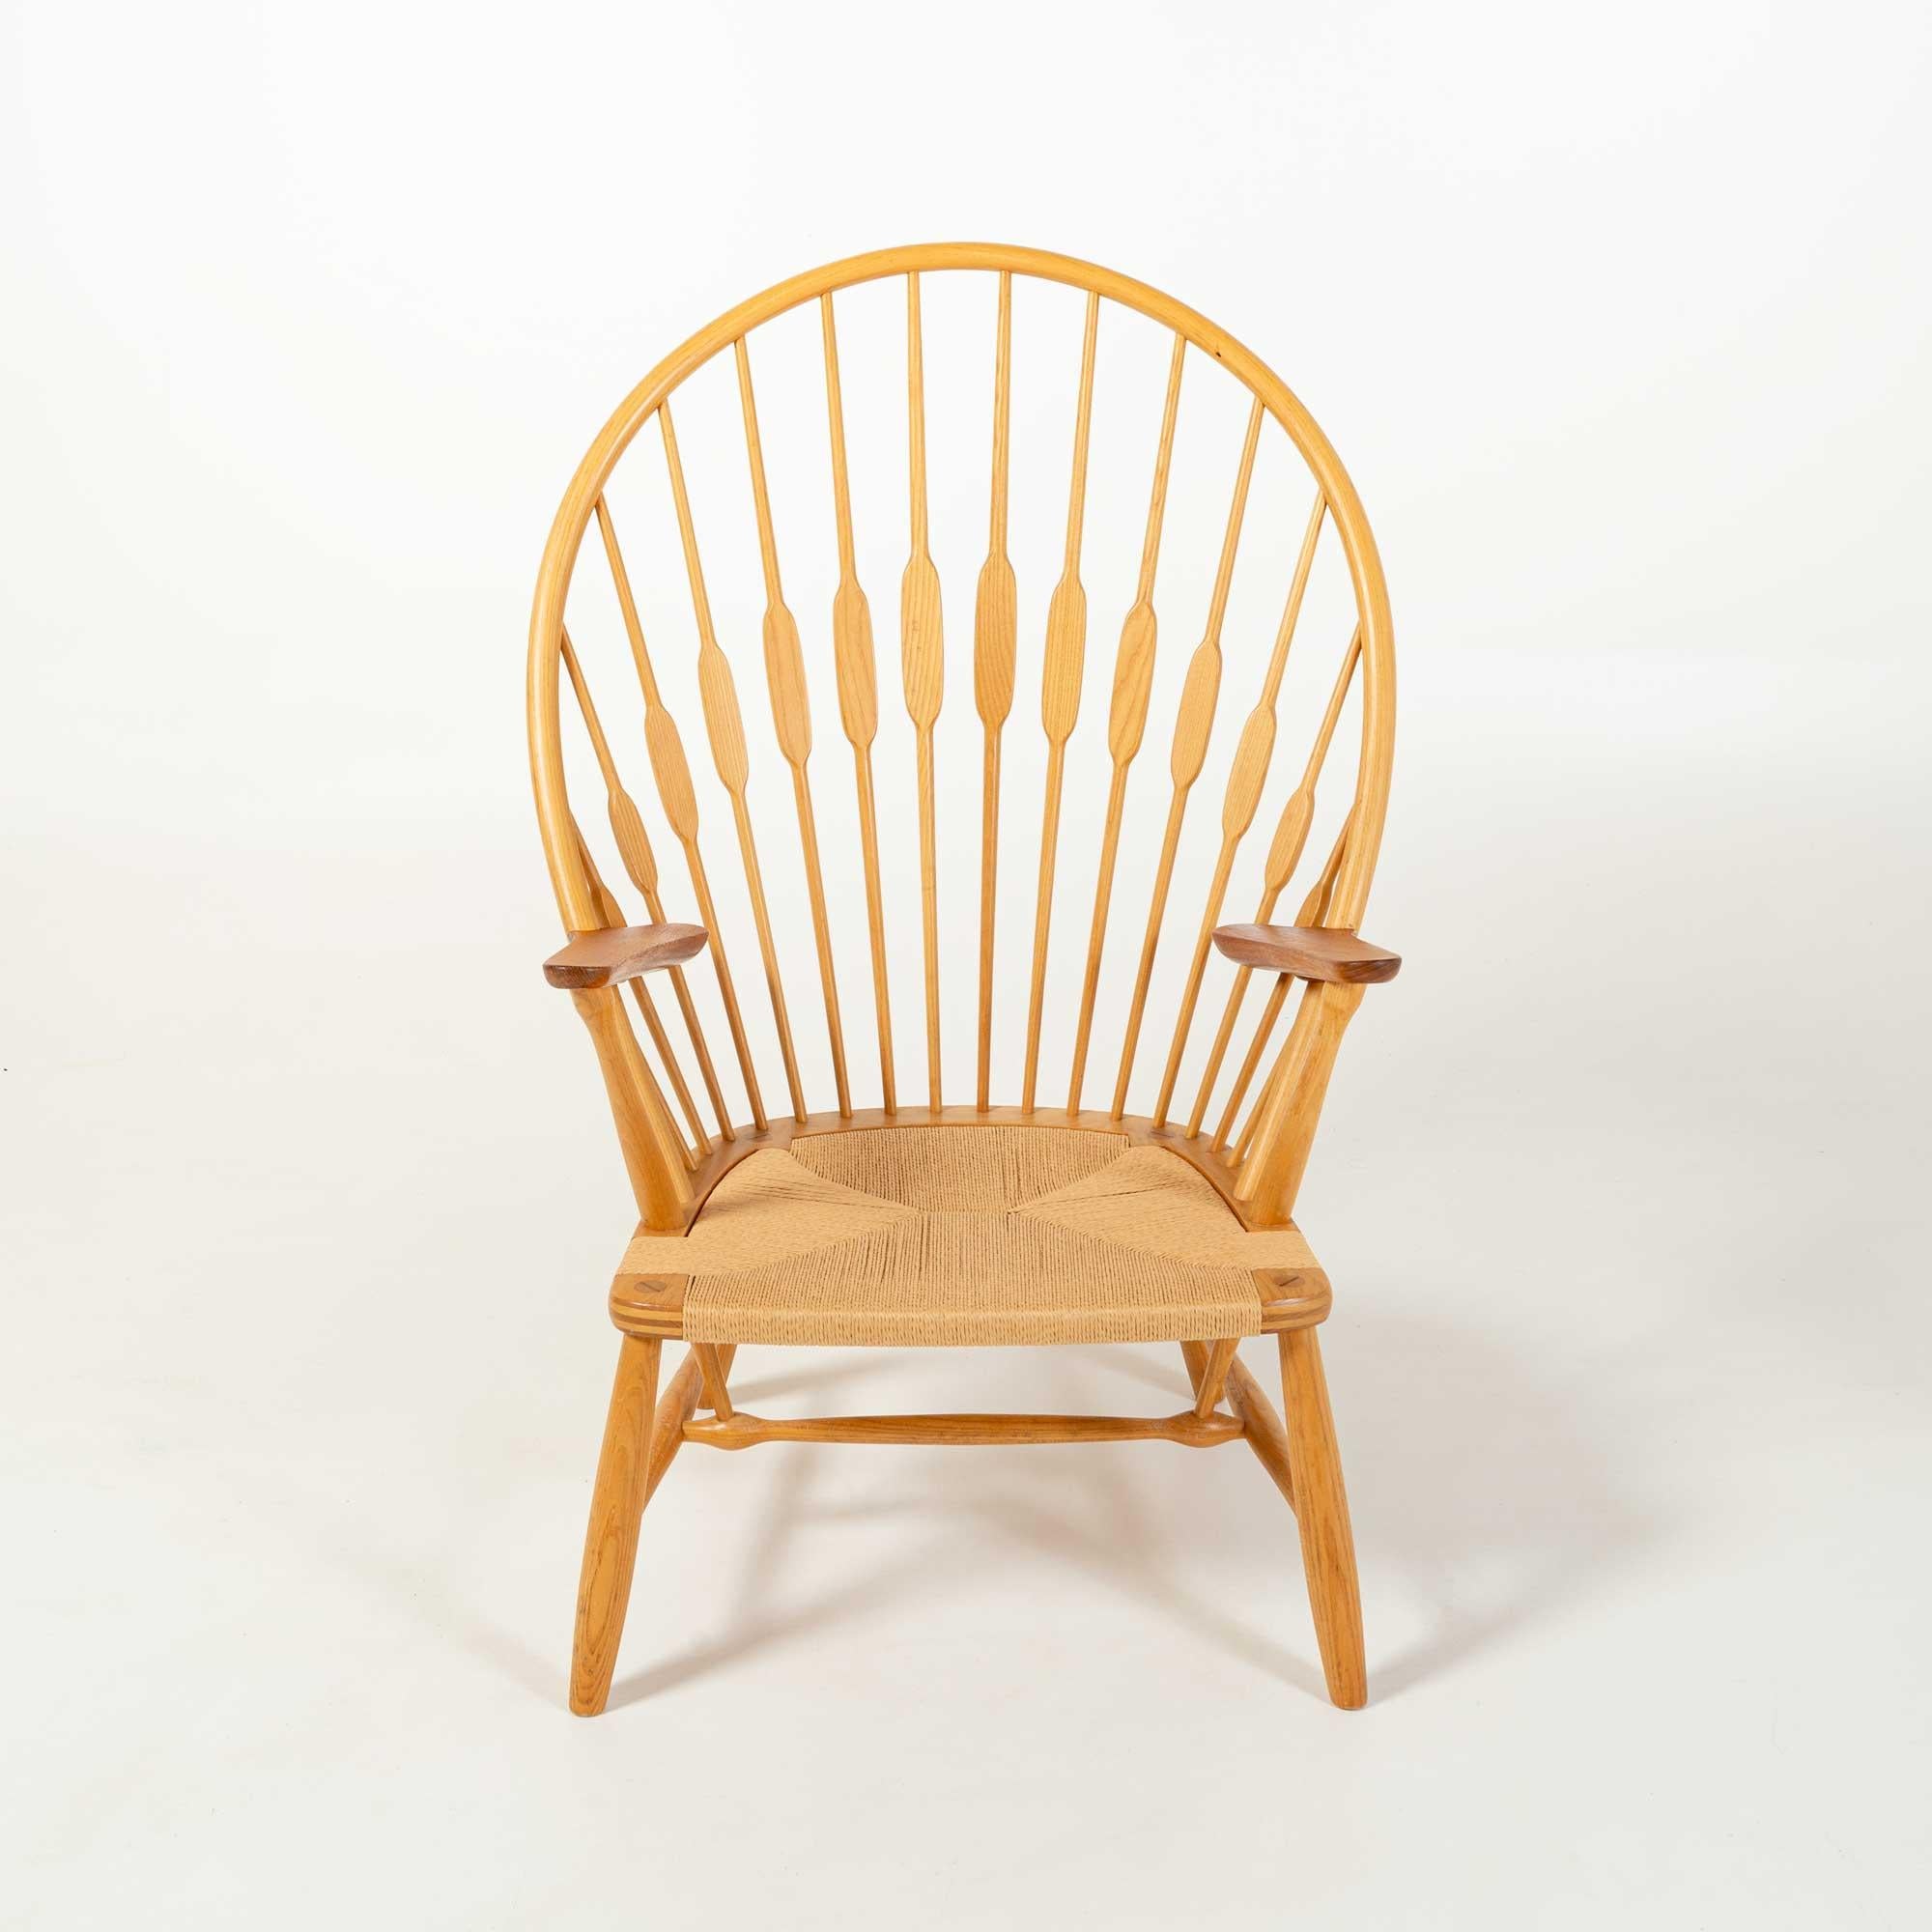 Hans Wegner JH50 chair, or more commonly known as the “Peacock Chair” had its name blessed by famous designer, Finn Juhl, and was designed in 1947 and produced by Johannes Hansen. This particular piece is from circa 1950s and is in overall good